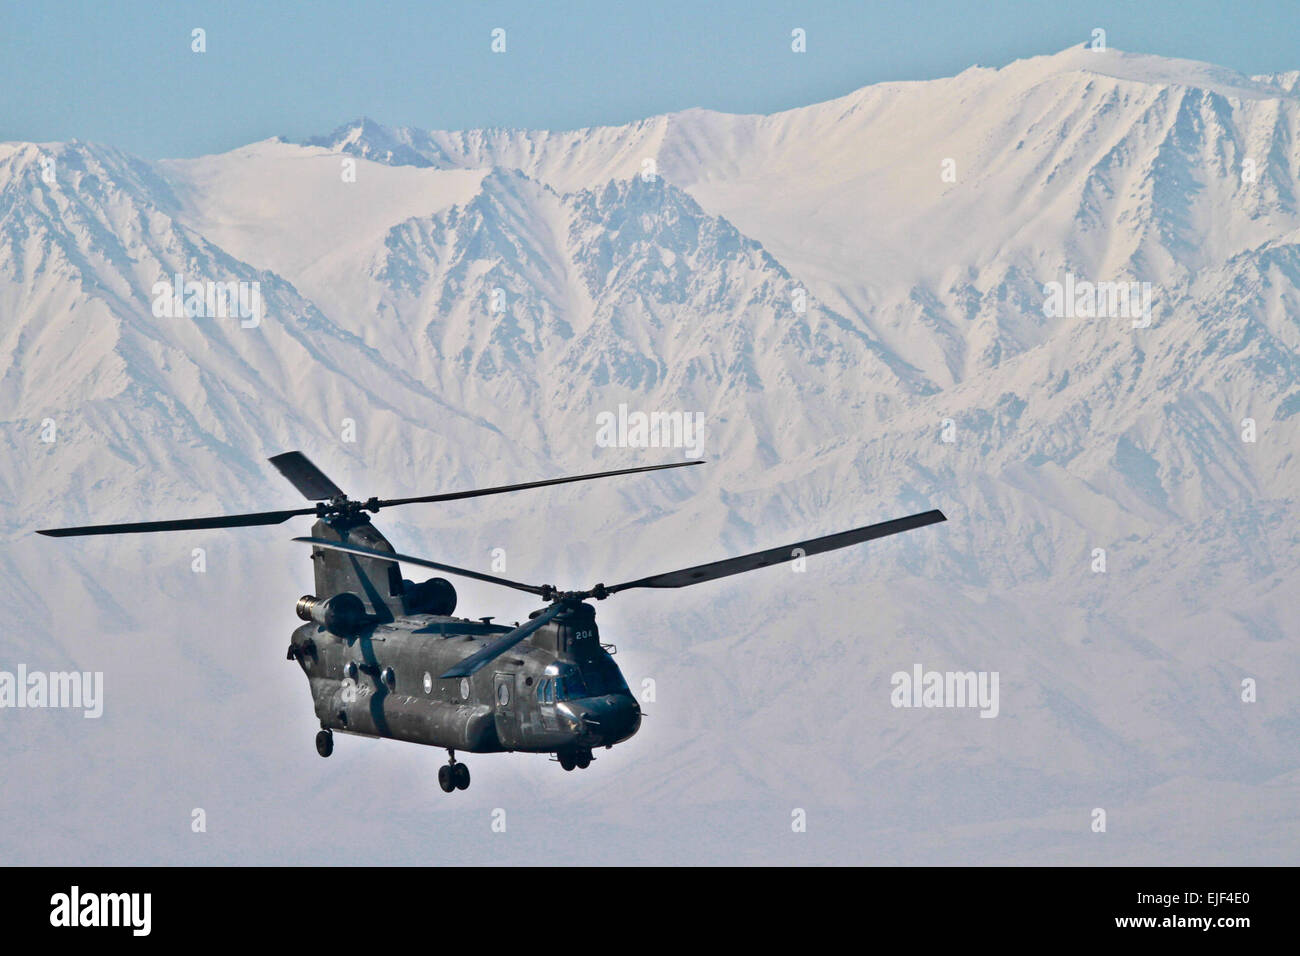 A U.S. Army CH-47 Chinook heavy lift helicopter lifts off from Bagram Air Field, Afghanistan, Feb. 29, 2012. Stock Photo